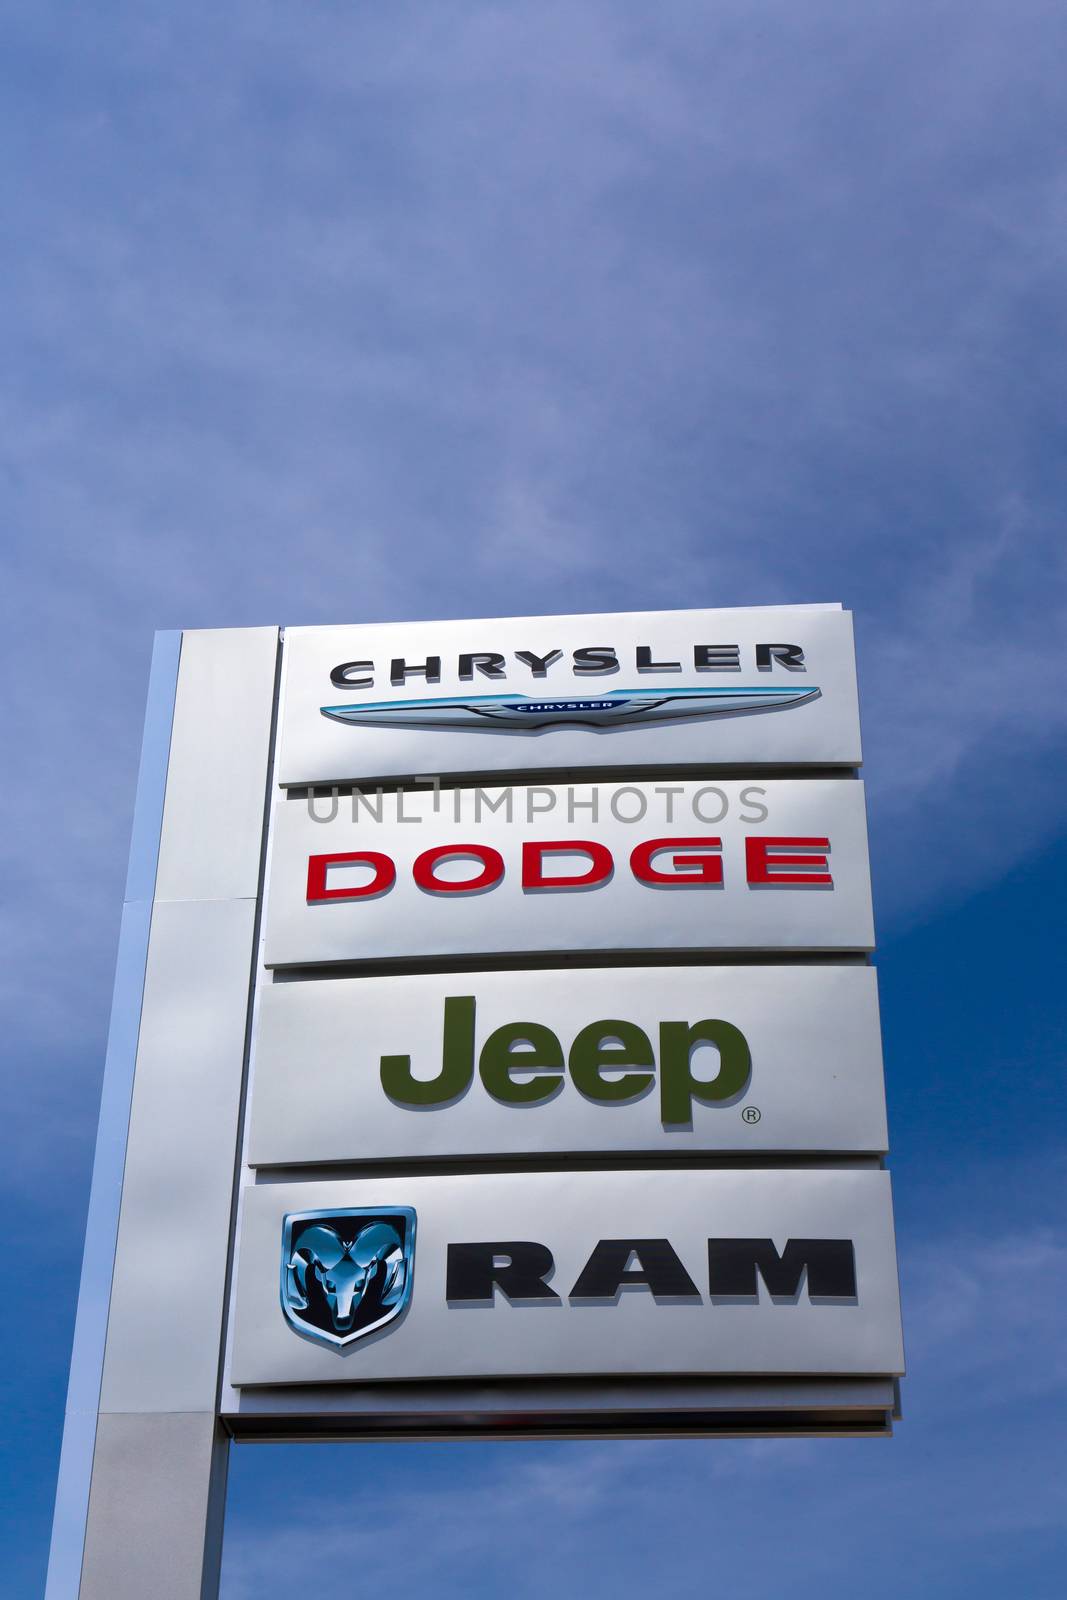 SAN JOSE,CA/USA - MAY 24, 2014: Chrysler, Dodge, Jeep and Ram automobile dealership sign. All are part of the Chrysler Motor Company, an American automobile manufacturer.